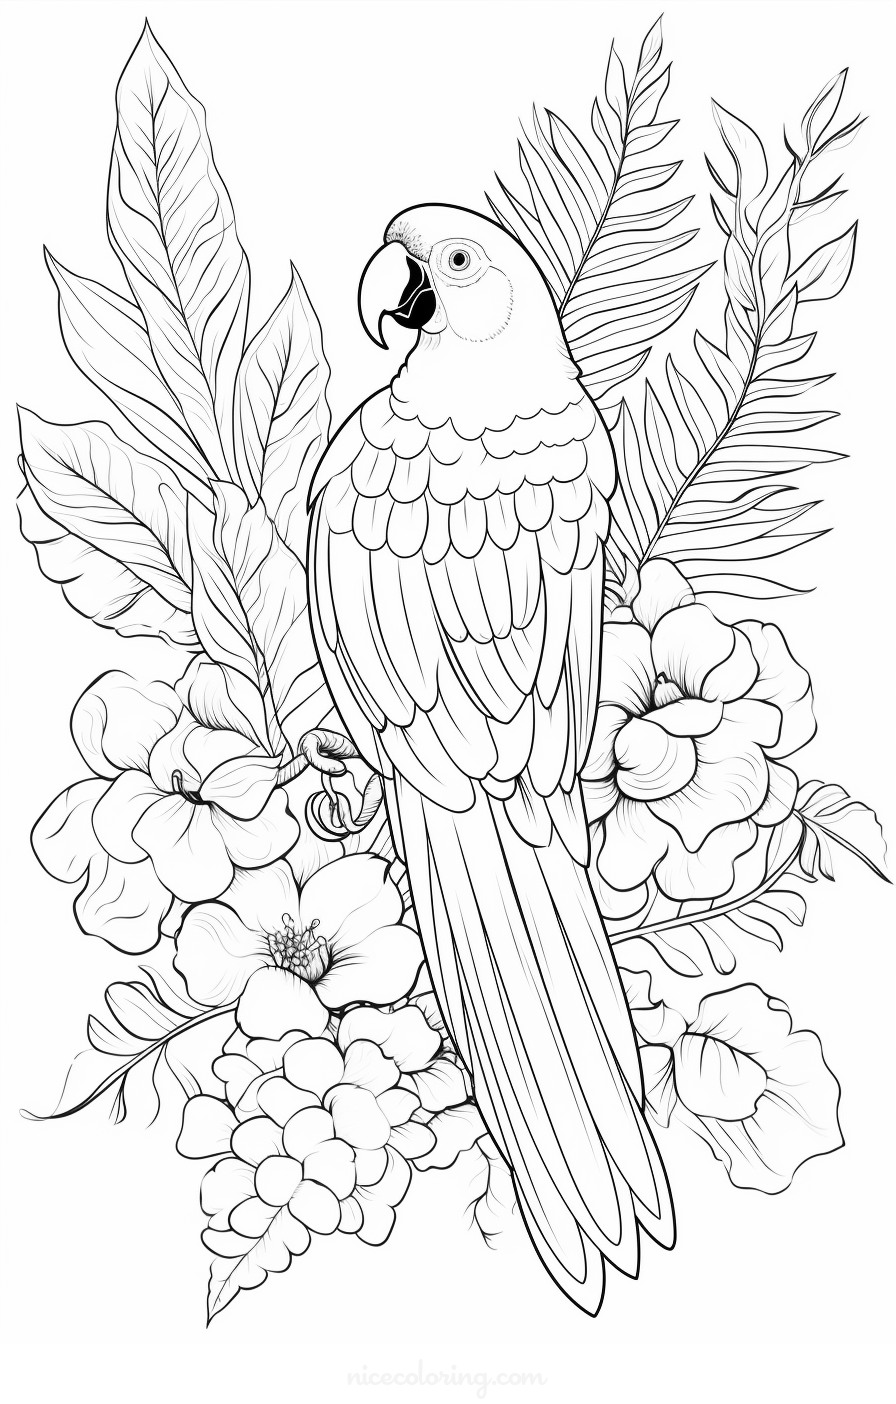 Bird perched on a branch coloring page